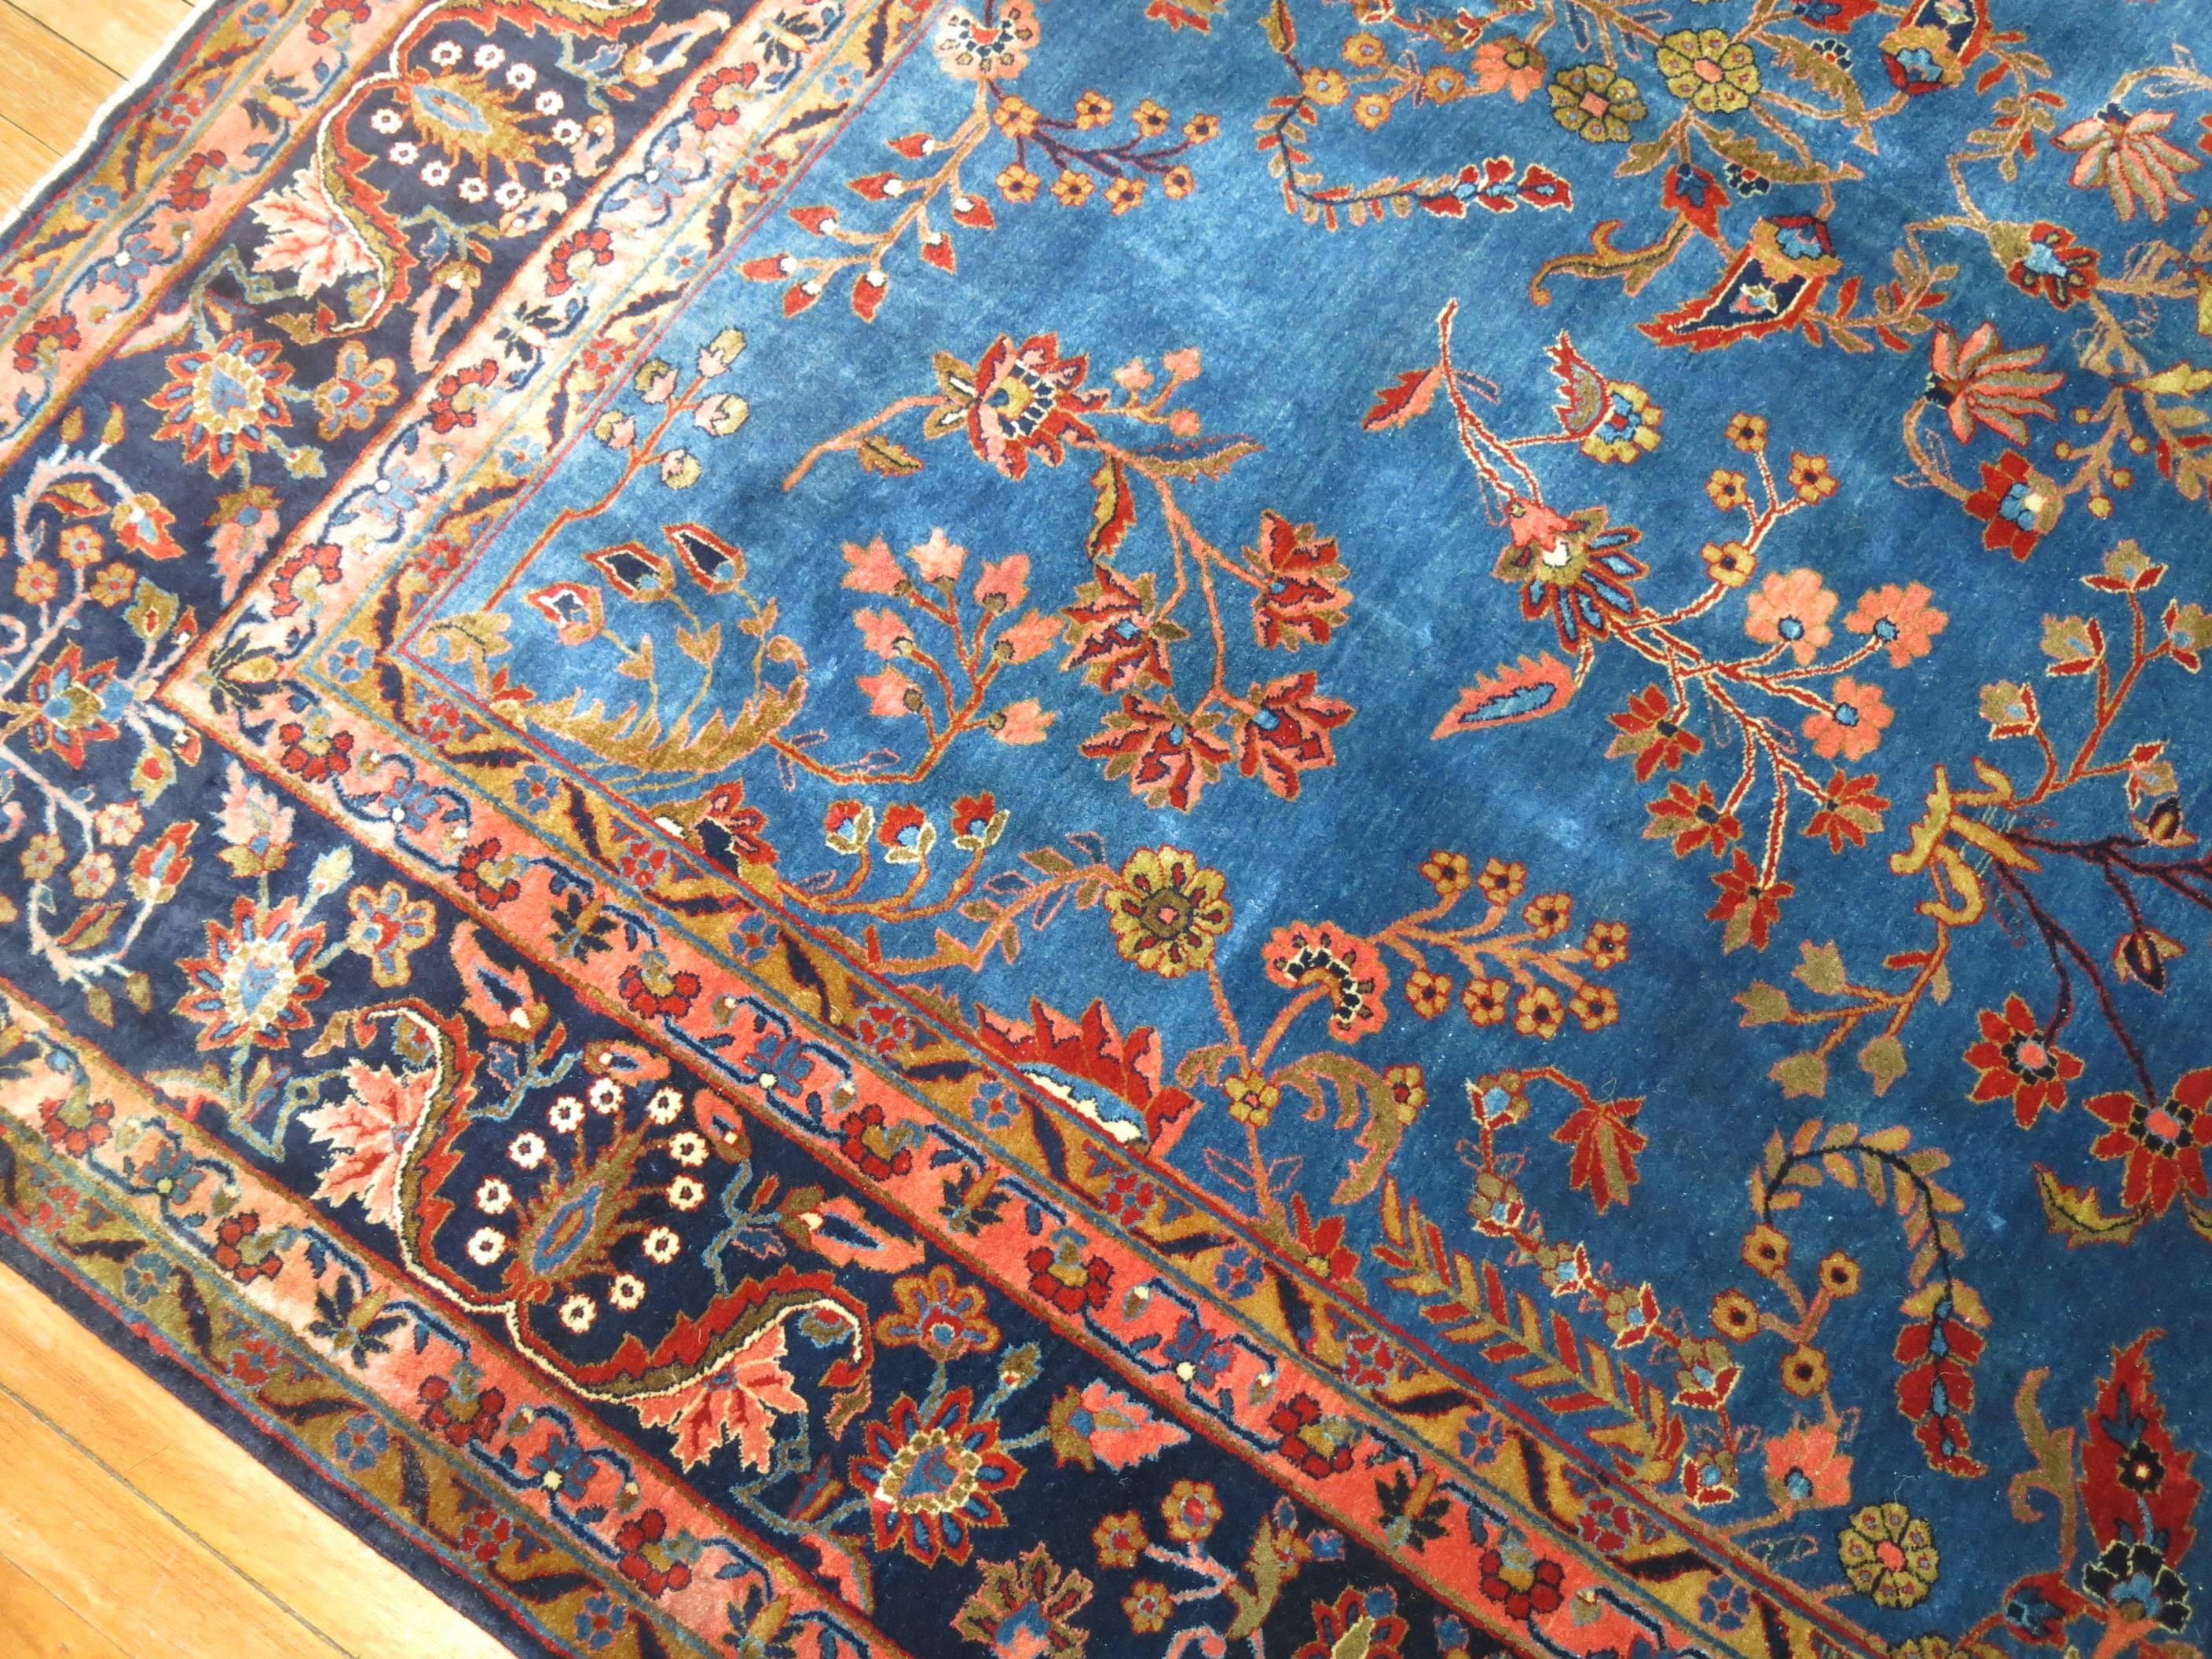 20th Century Antique Manchester Kashan Rug in Blue Tones, Signed